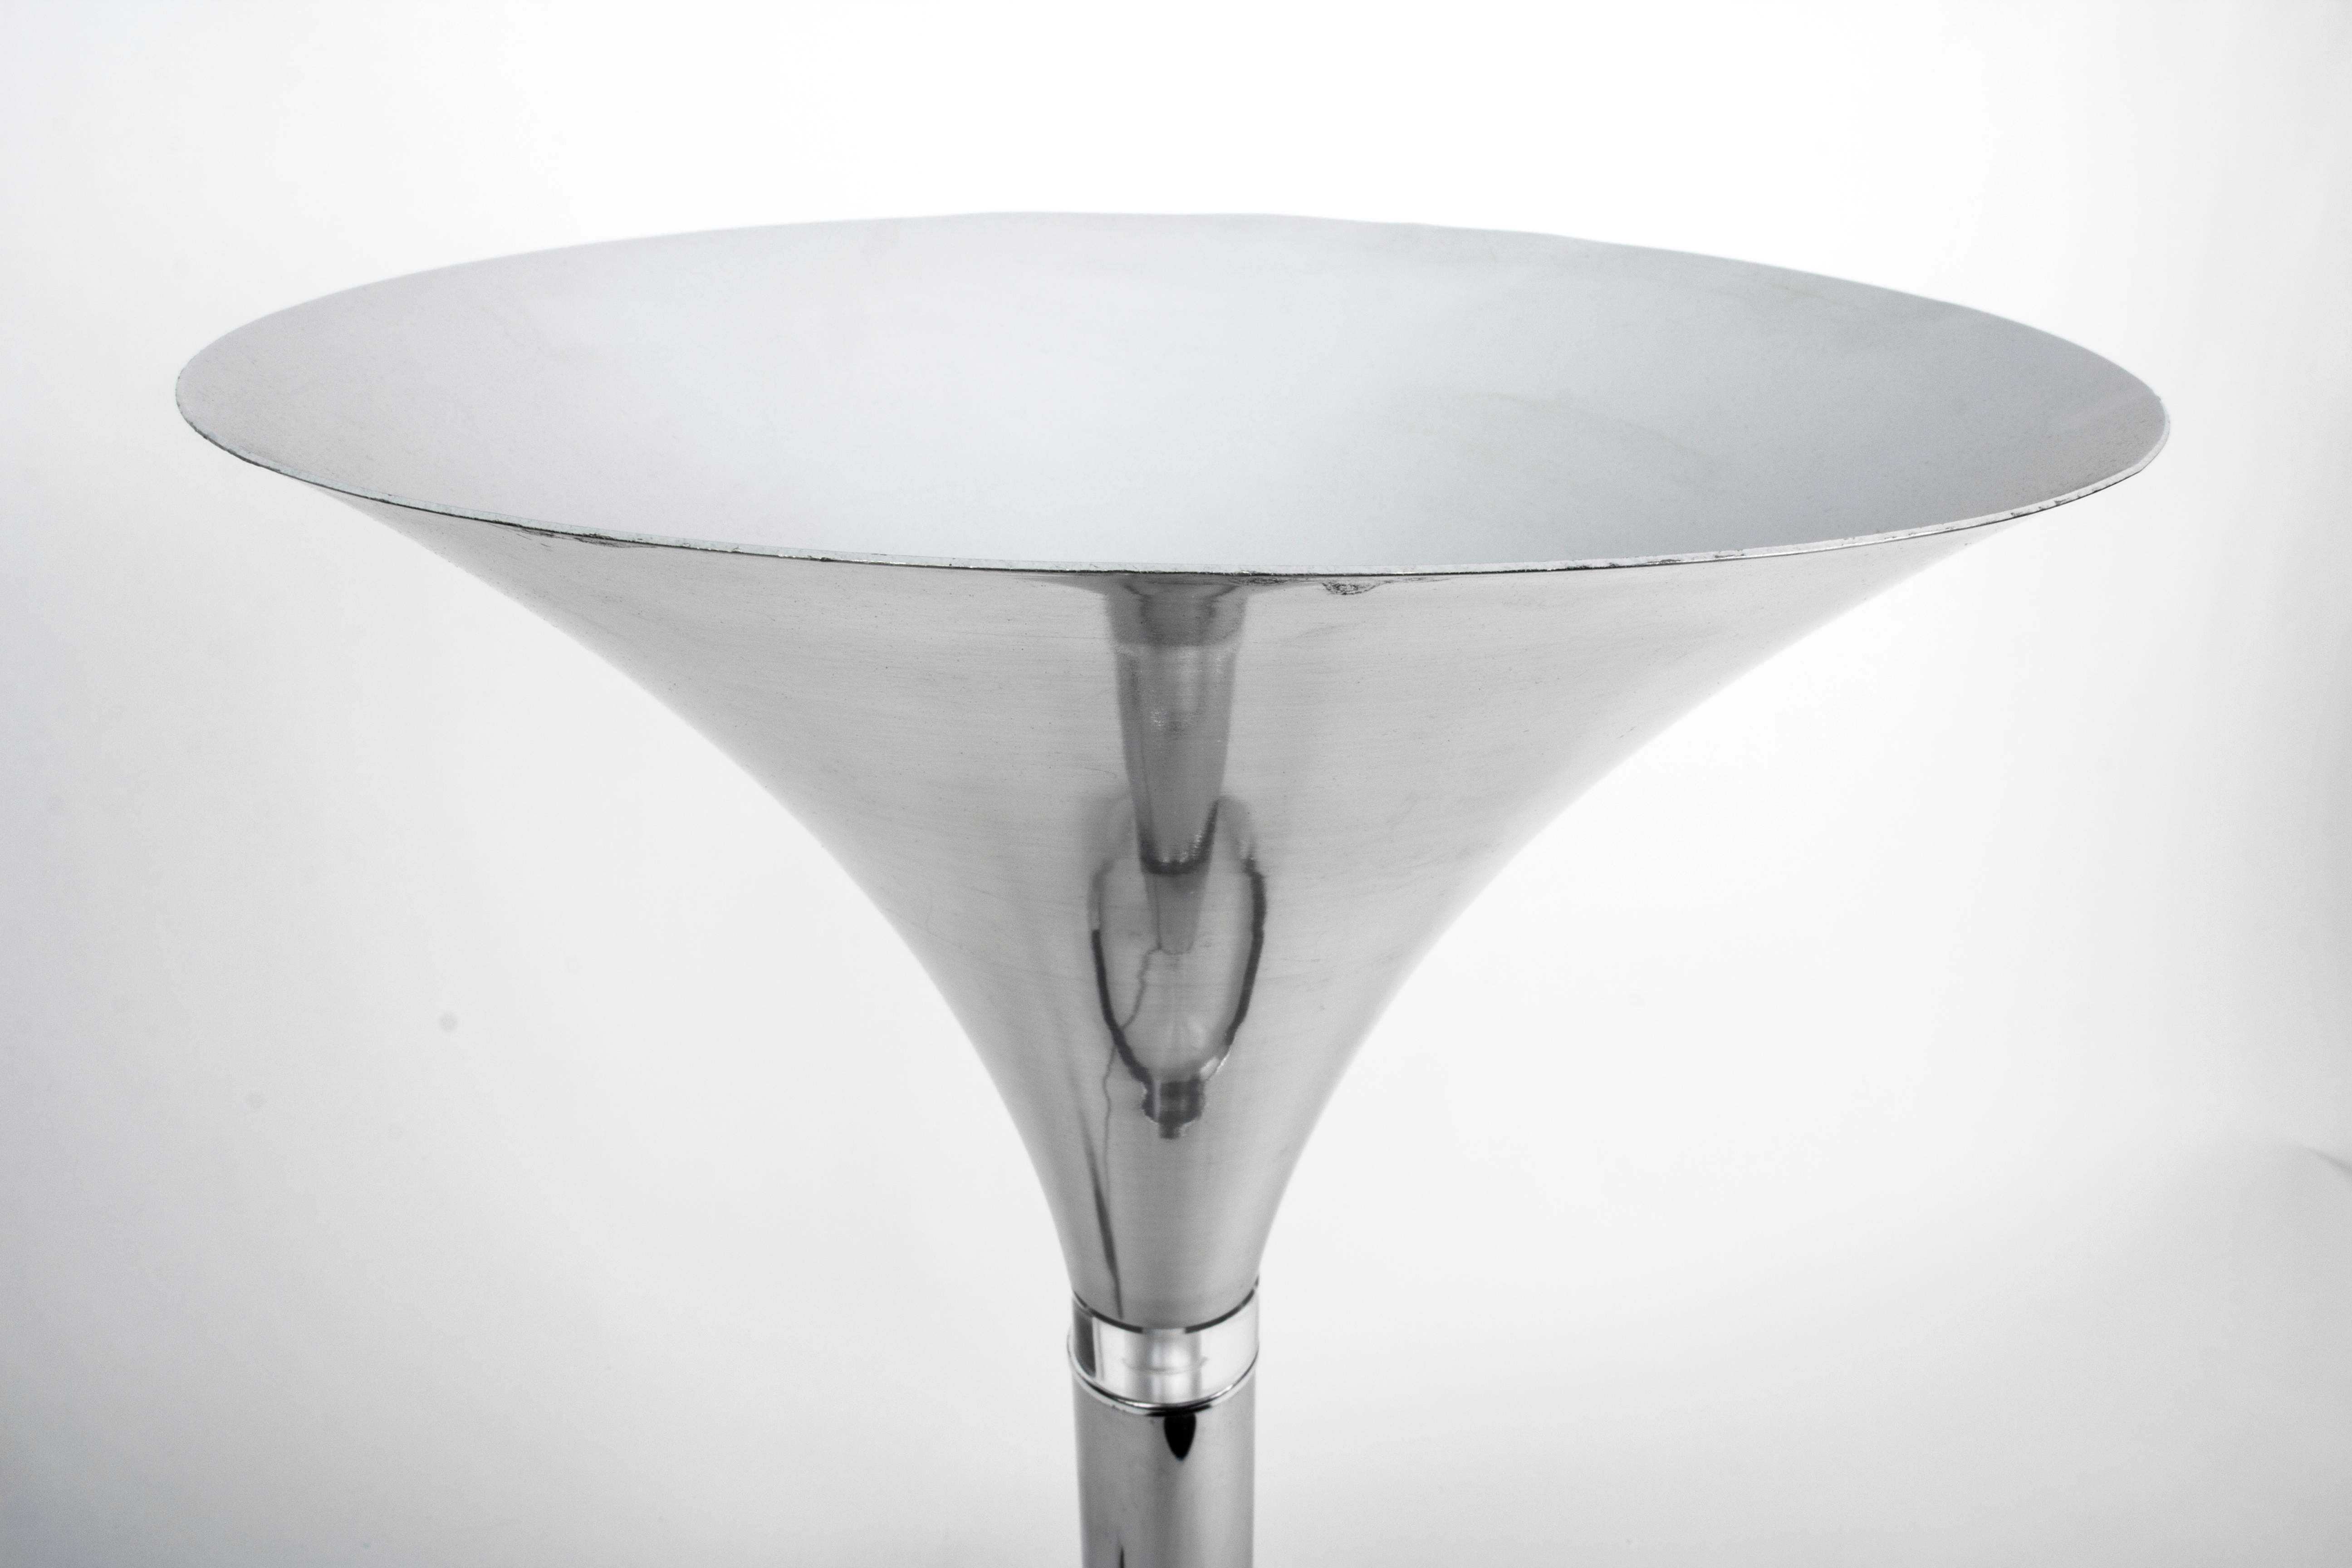 This beautiful 1970s Mid-Century Modernist table lamp. It features a trumpet form base with chrome and Lucite detailing with pearl white accents.